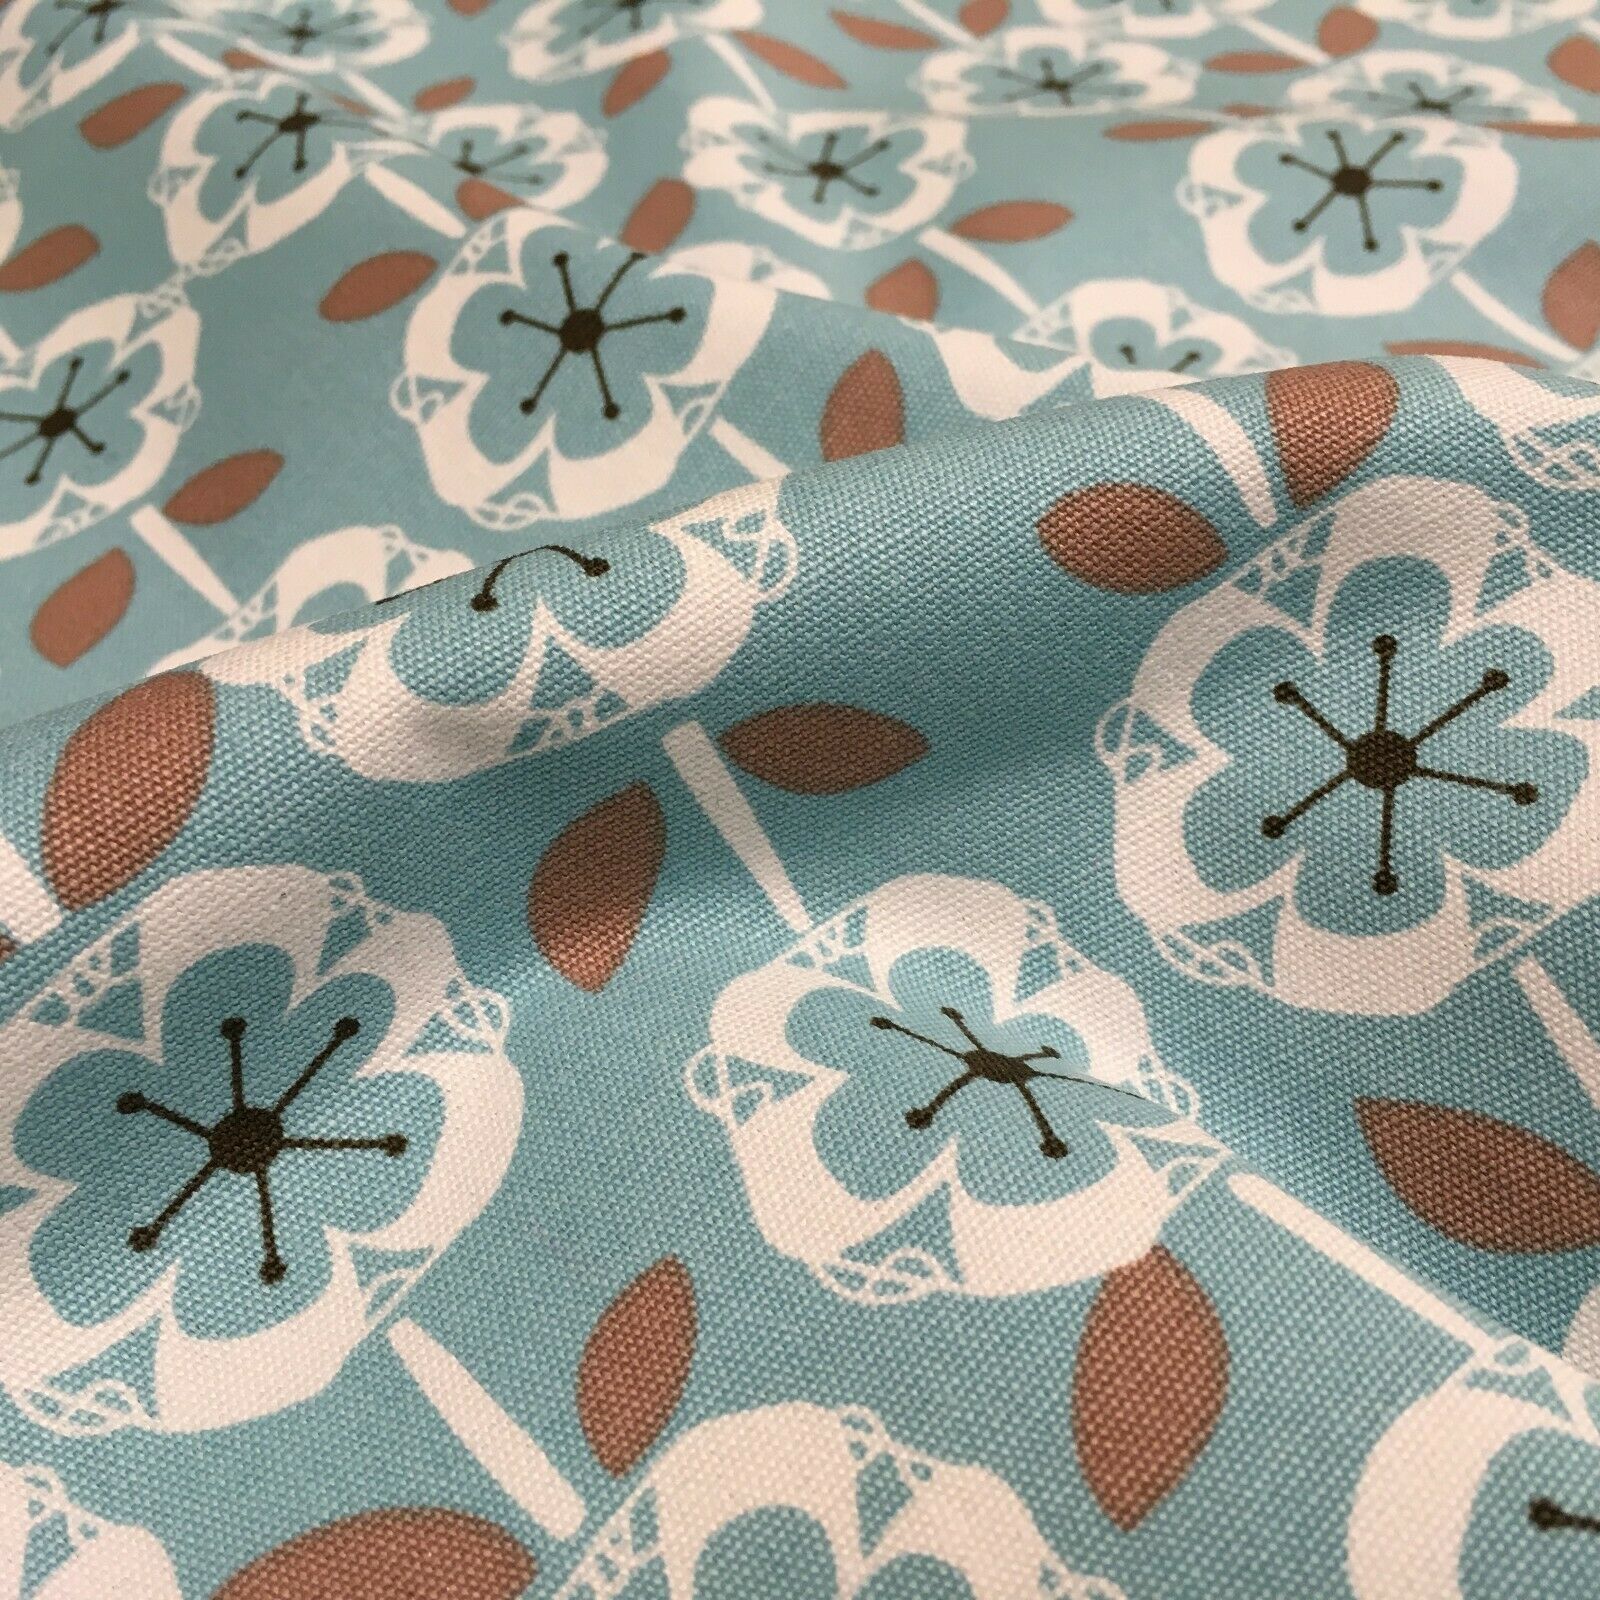 Duck egg Floral 100% Cotton Canvas Craft Fabric  MK856-27